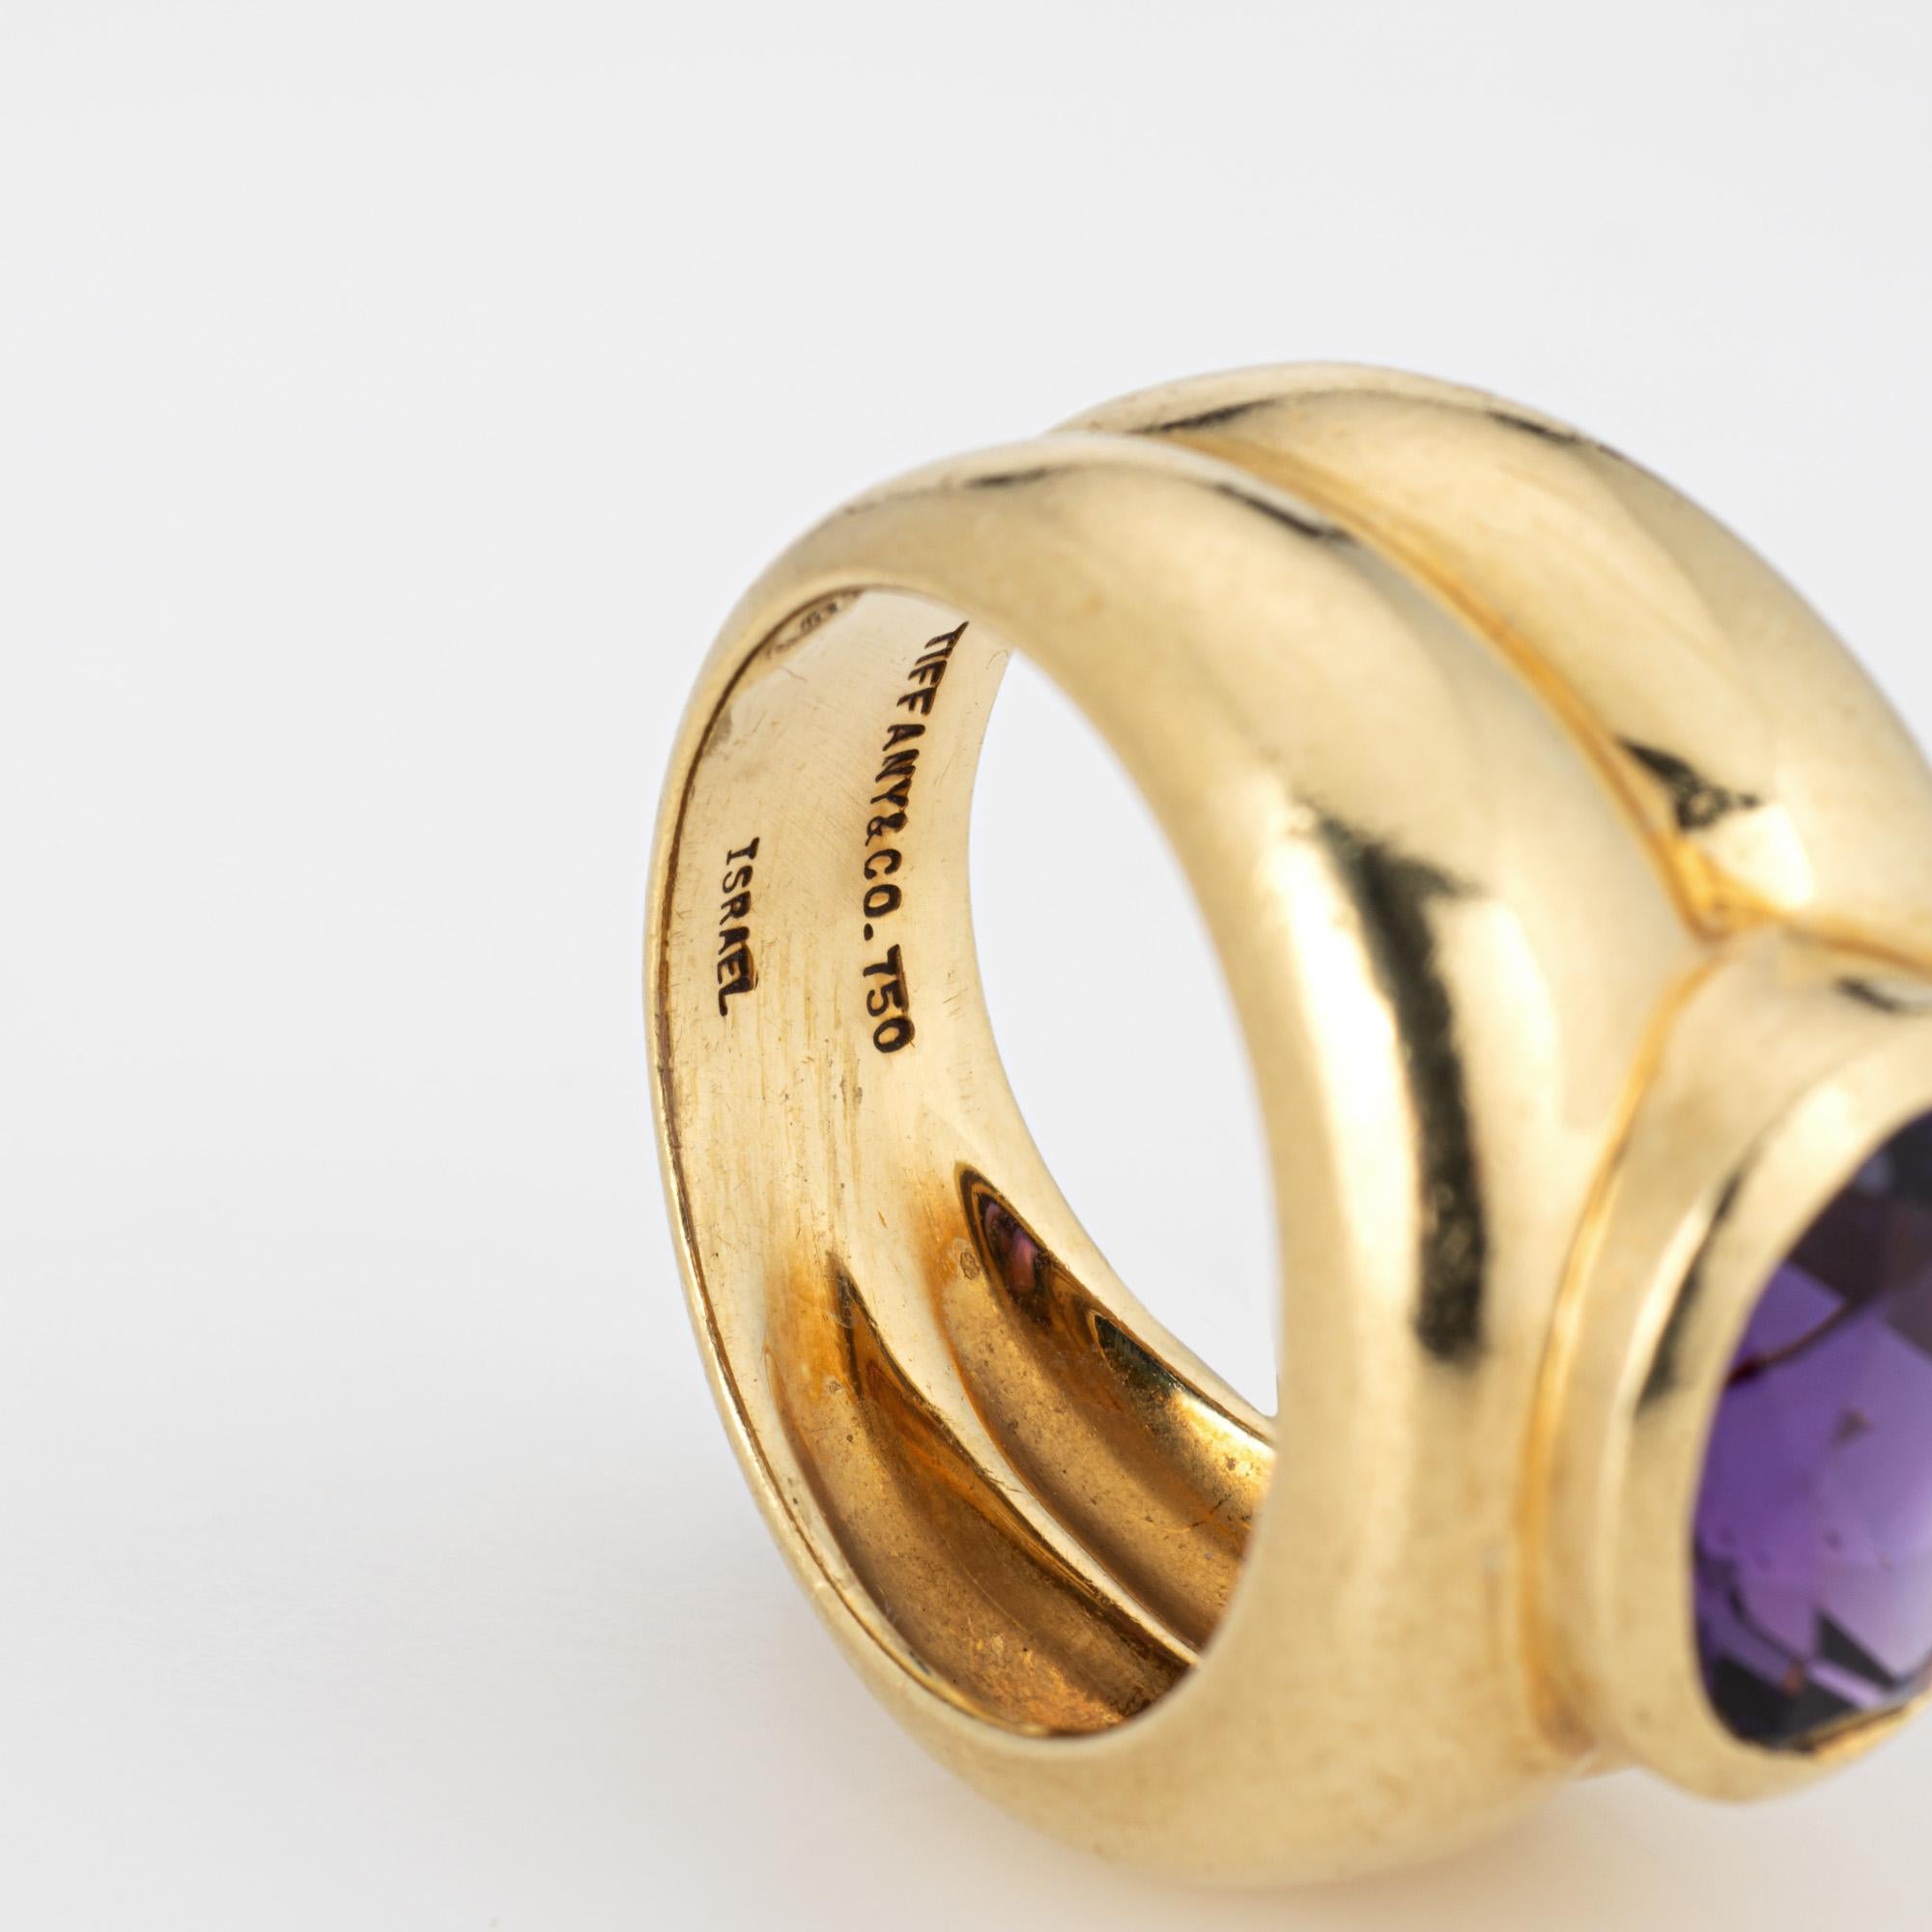 Vintage Tiffany & Co Amethyst Ring 18k Yellow Gold Sz 5.5 Band Signed Jewelry In Good Condition For Sale In Torrance, CA